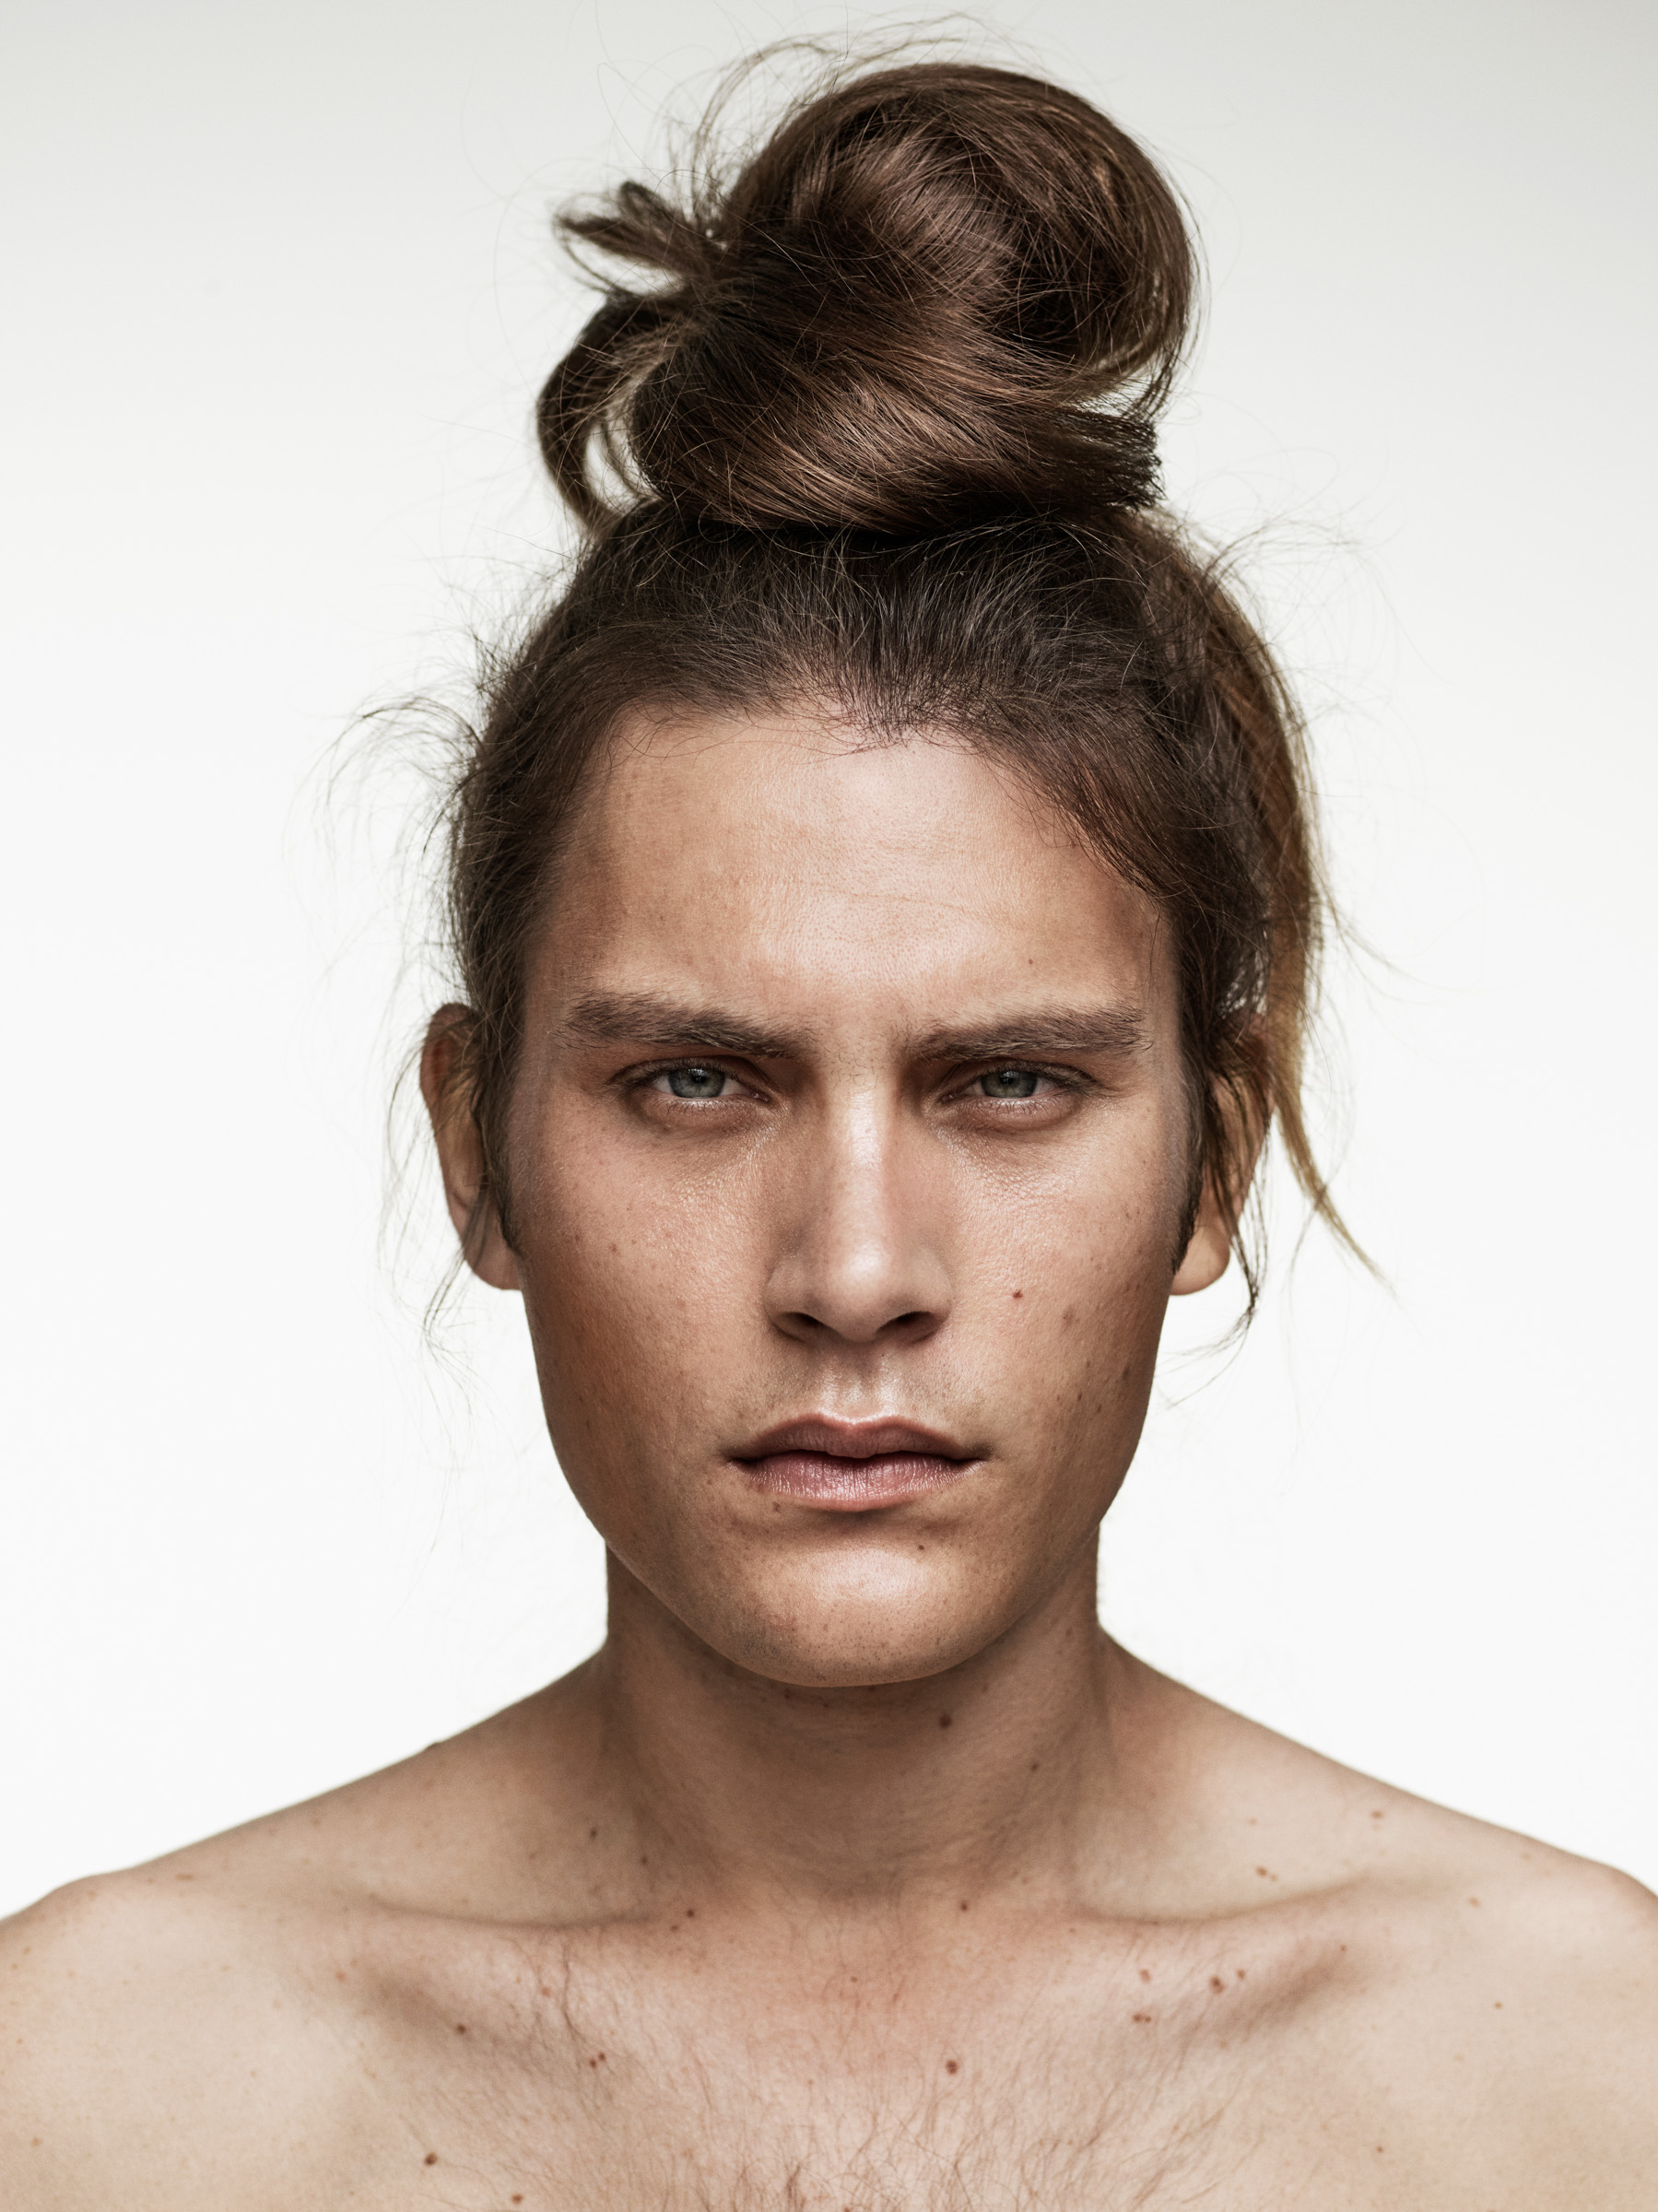 A male model with long blonde hair in a bun styled by Hooker and Young